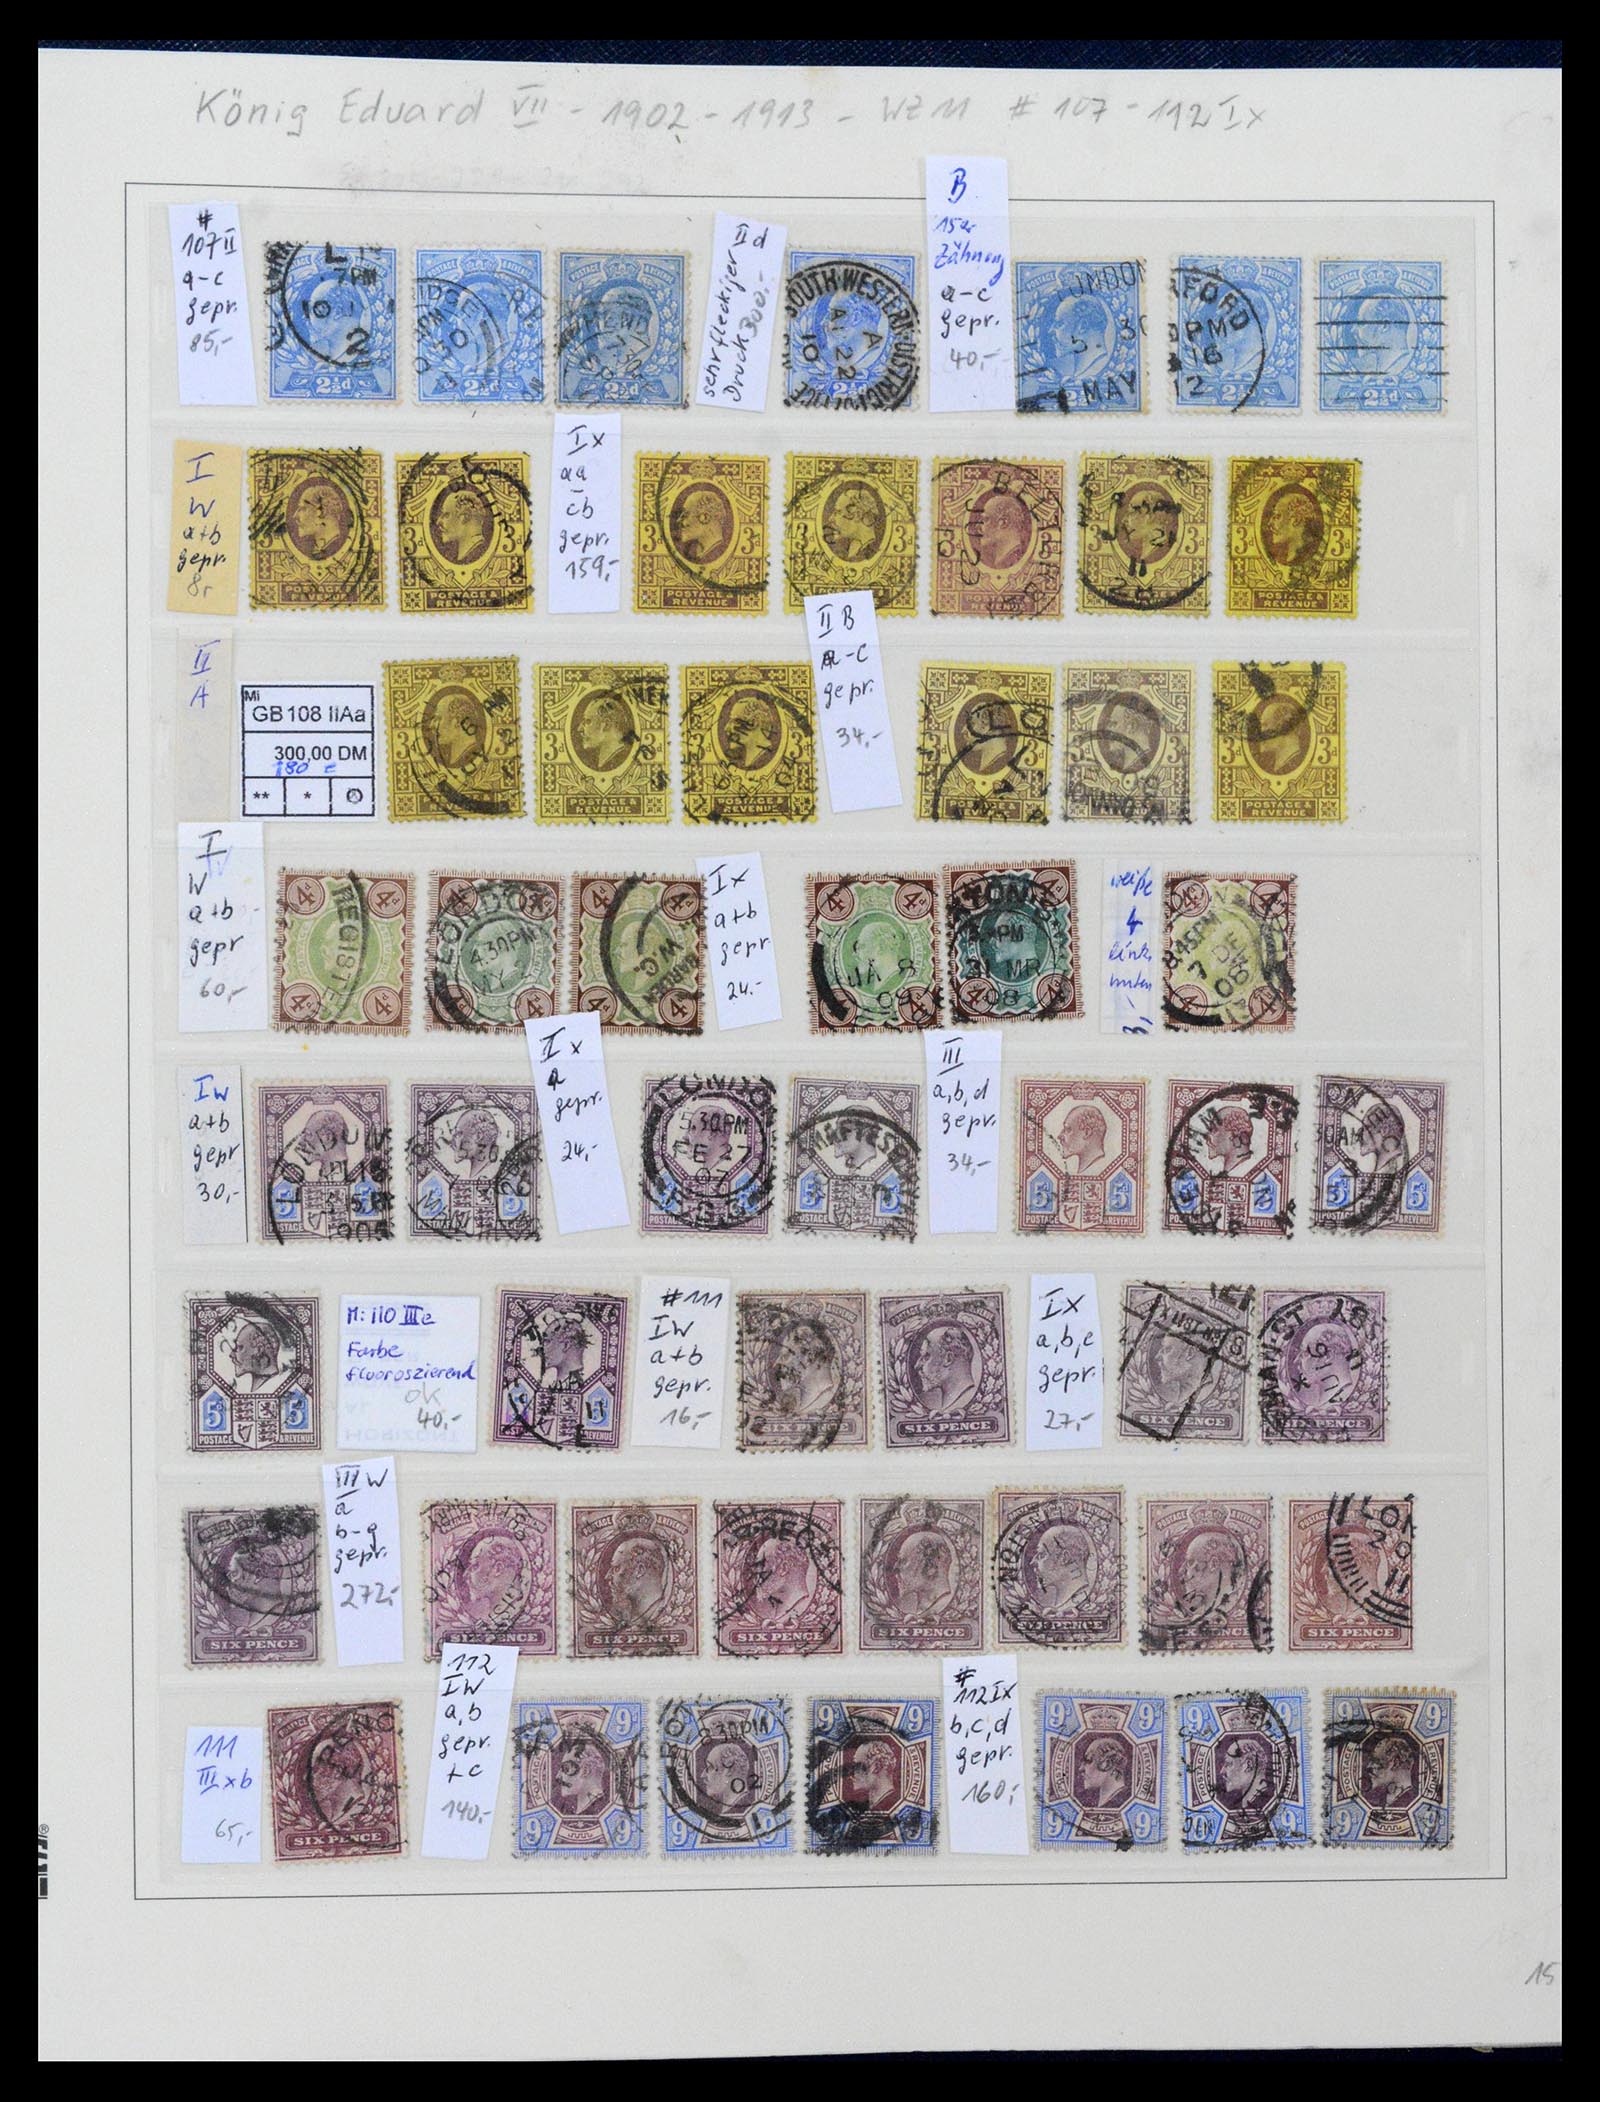 39020 0018 - Stamp collection 39020 Great Britain 1840-1939.